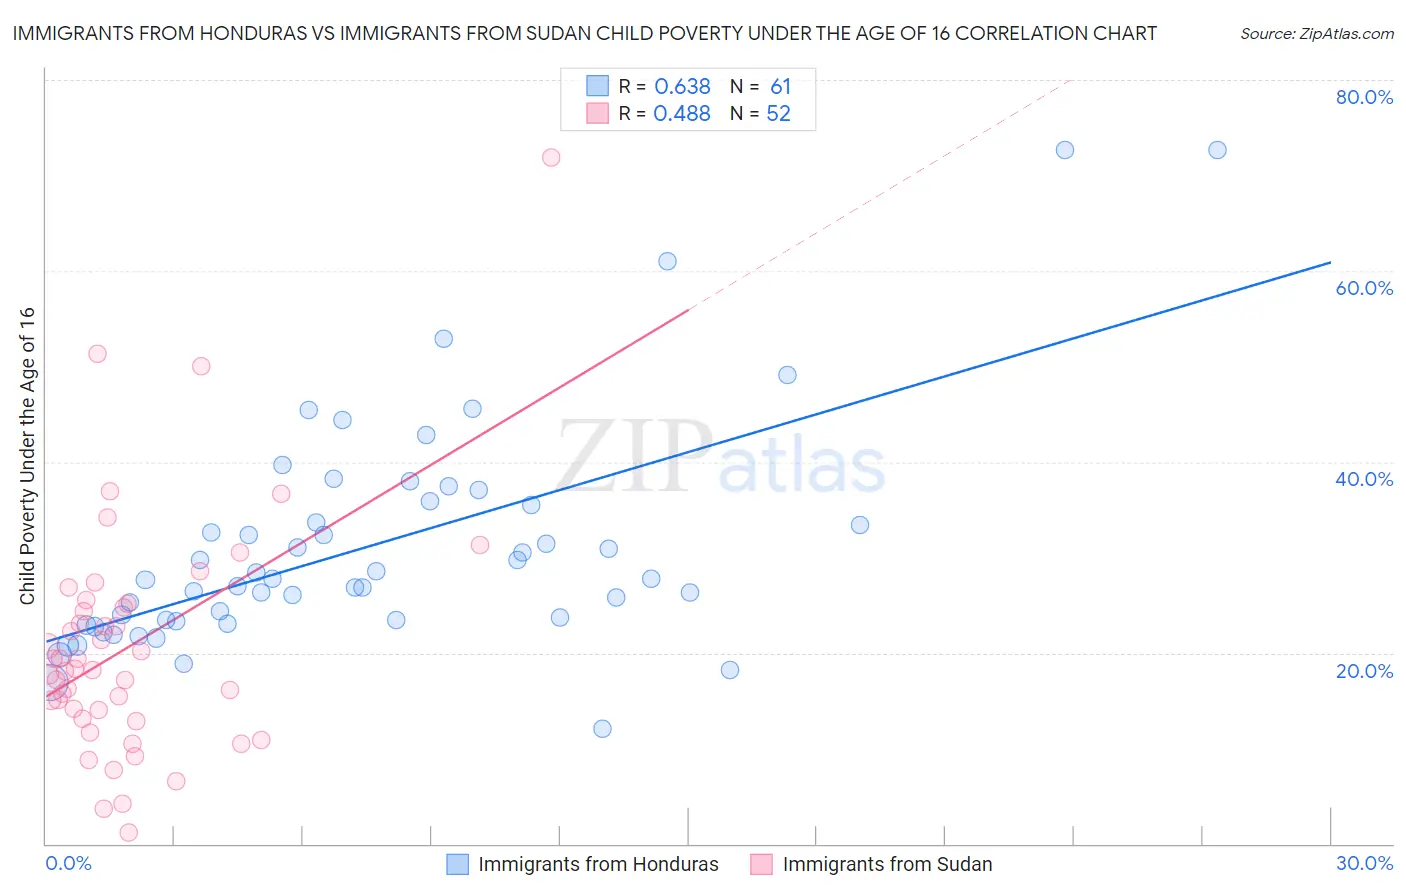 Immigrants from Honduras vs Immigrants from Sudan Child Poverty Under the Age of 16